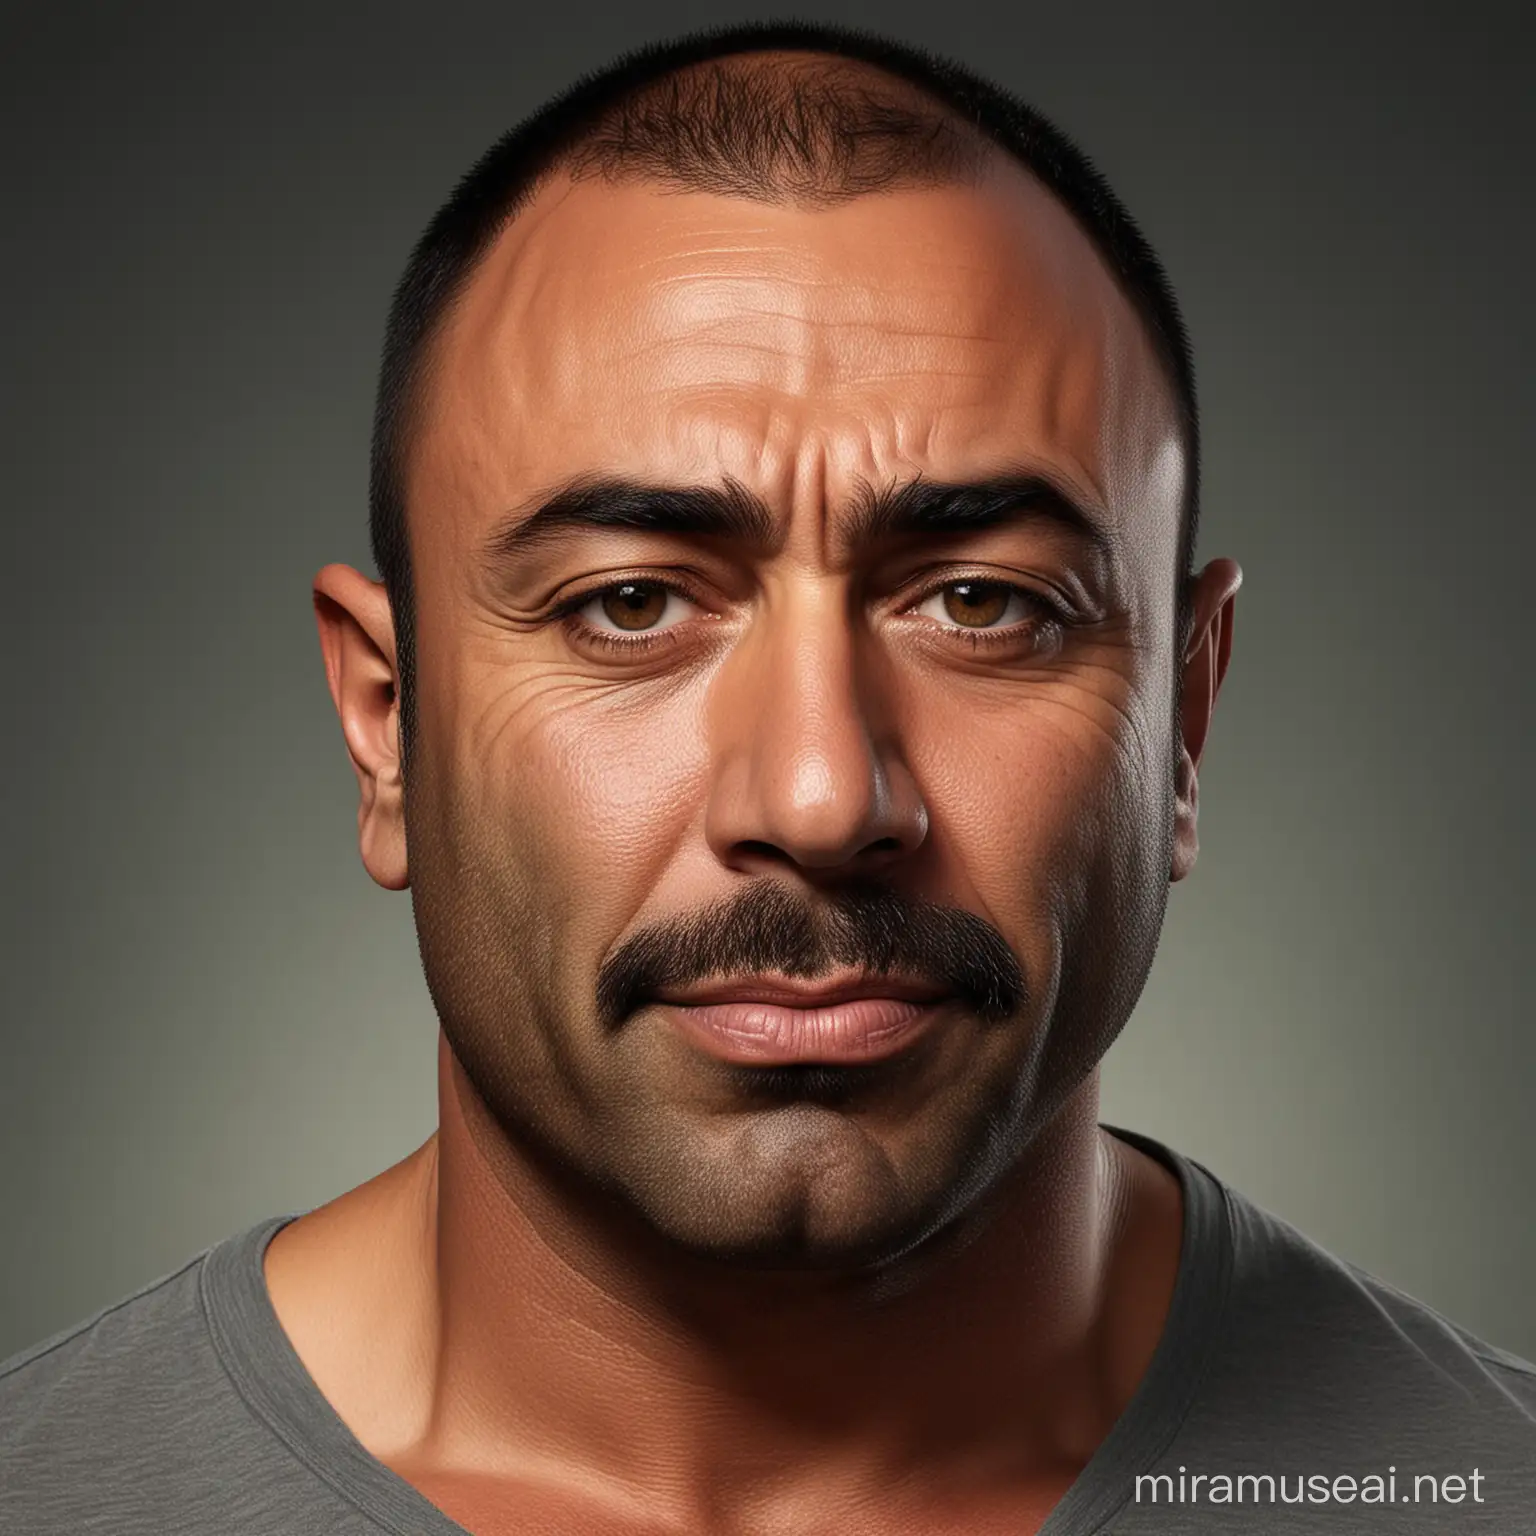 Indian Joe Rogan with Modest Appearance and a Small Mustache